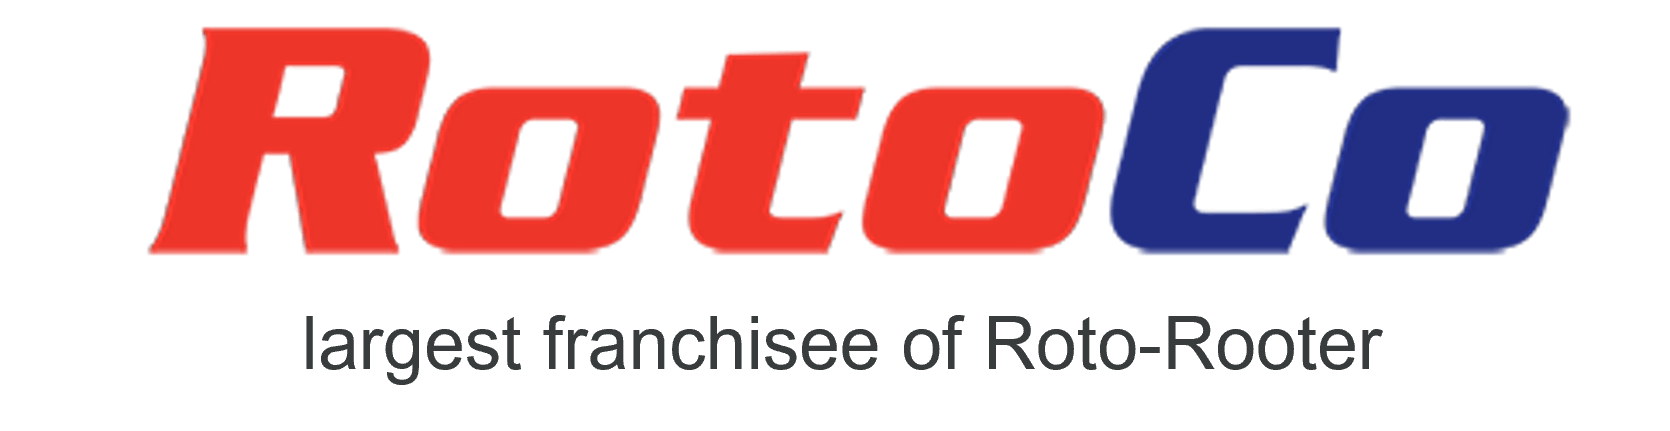 largest franchisee of Roto-Rooter 